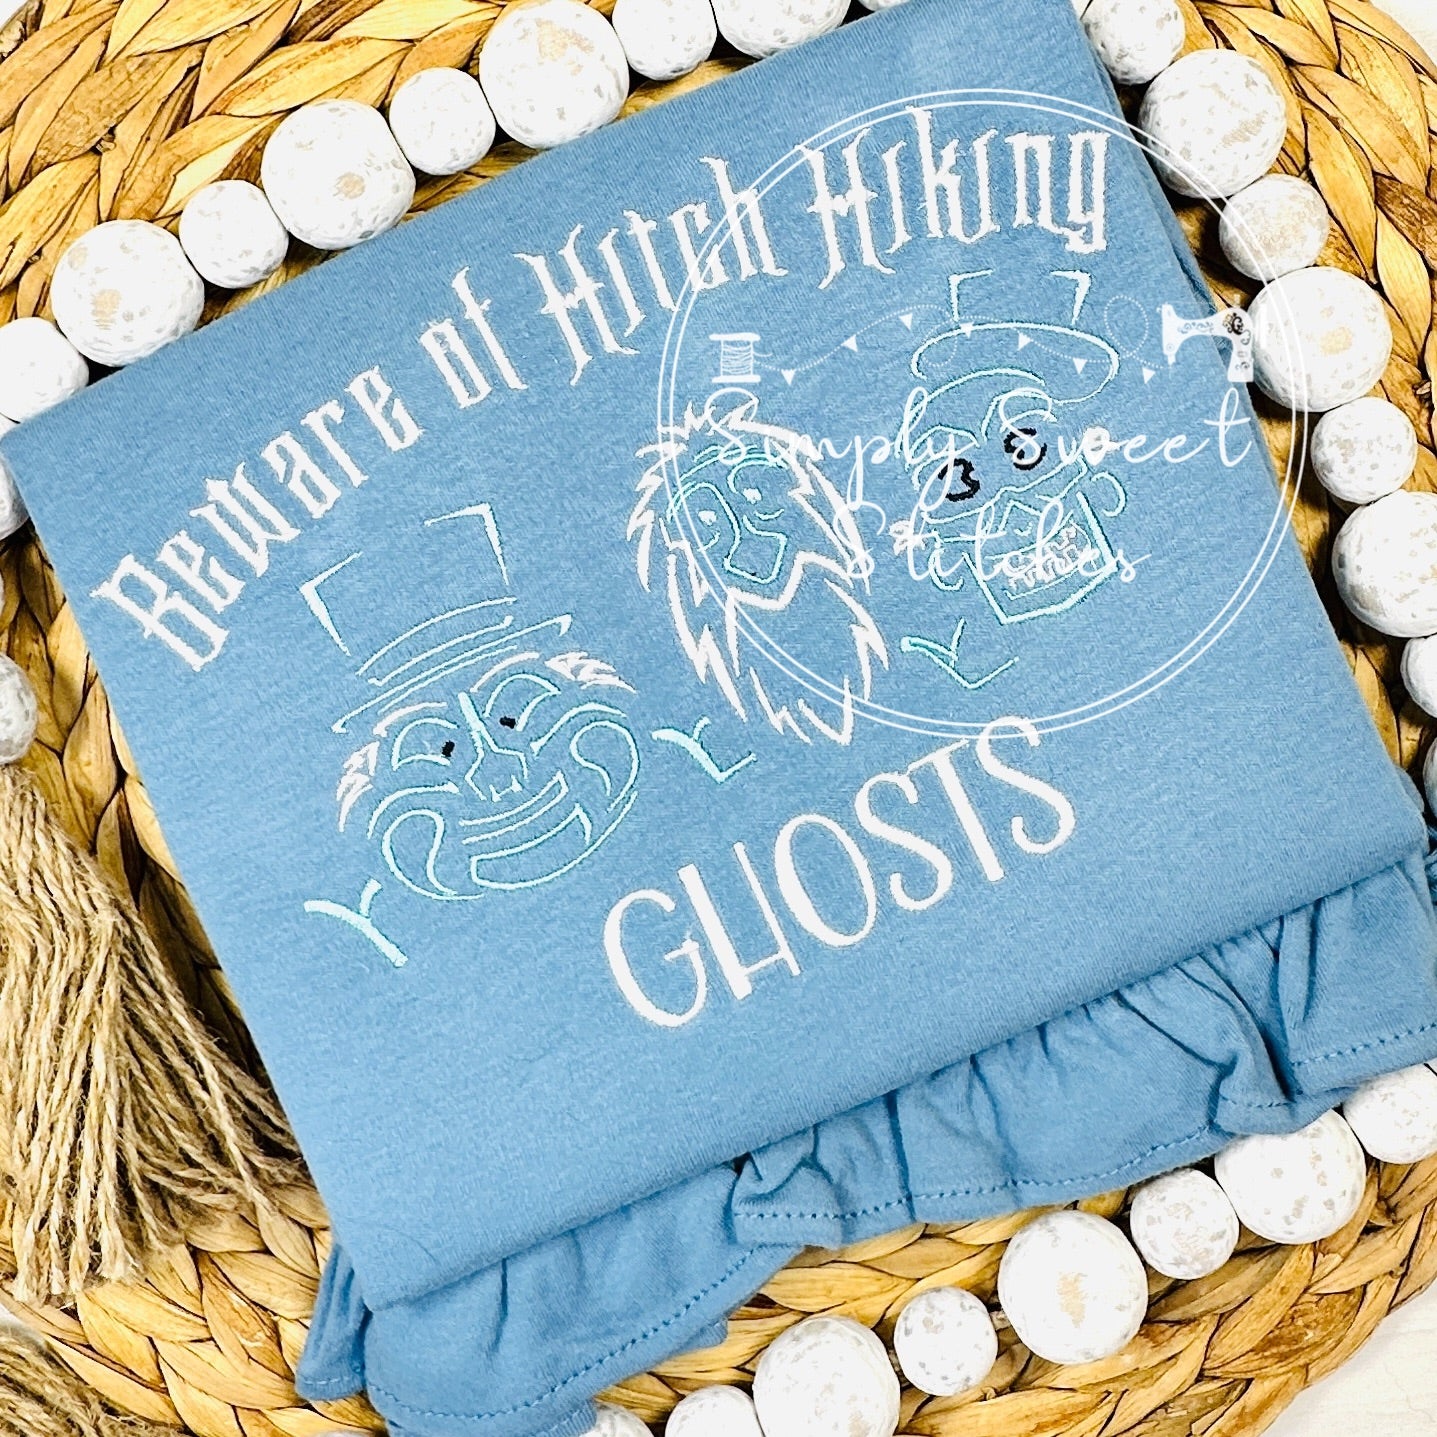 2585 - HITCH HIKING GHOSTS - APPLIQUE CHILD SHIRT